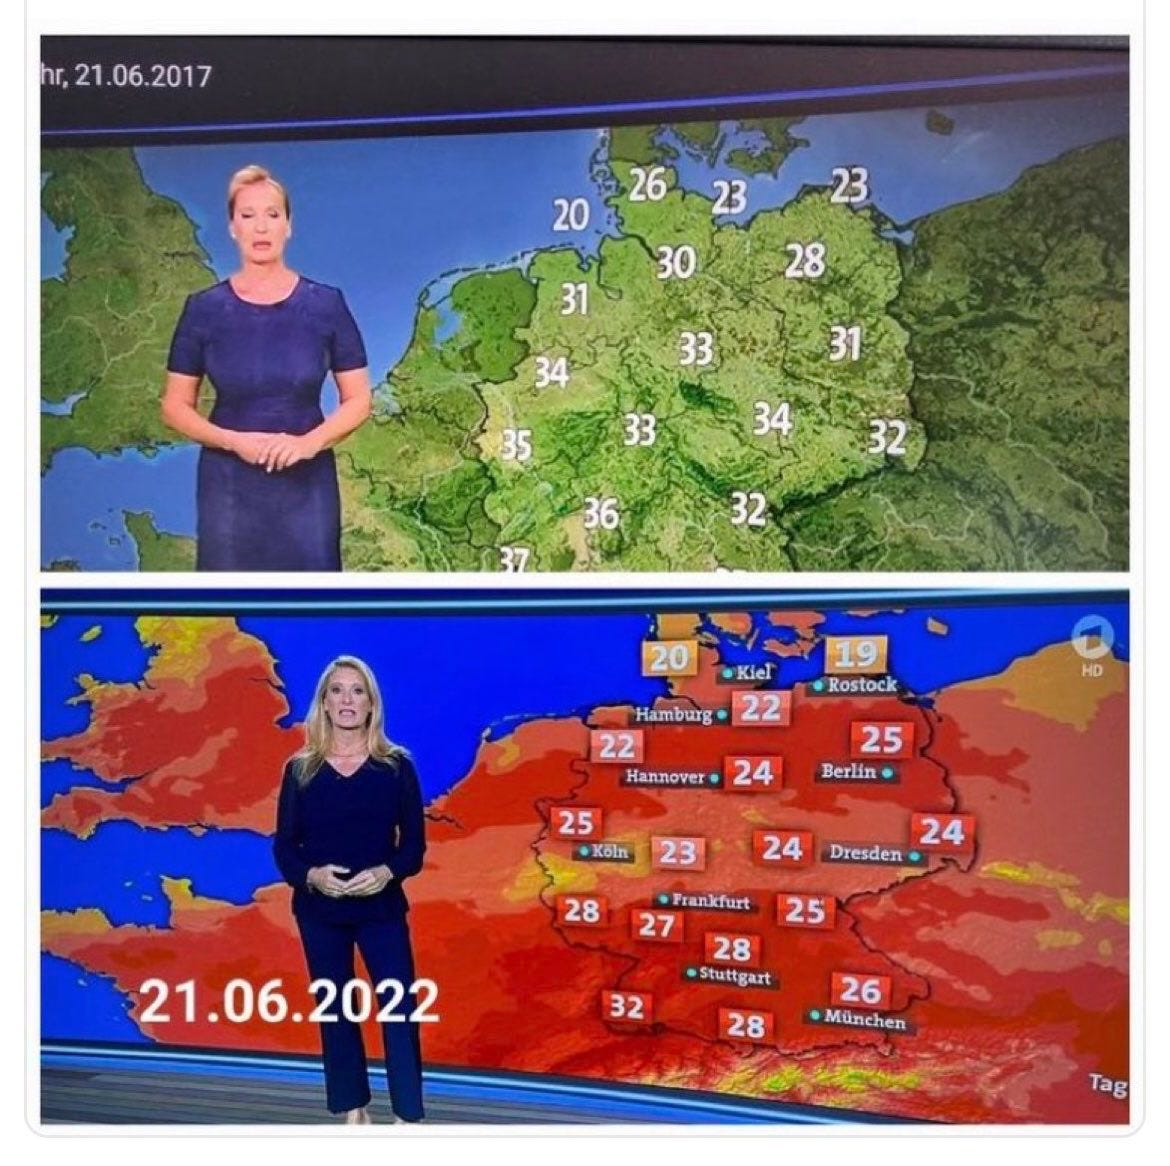 JB on Twitter: "Germany. How summer weather was visualised & reported in  2017 (top) compared to 2022. 🤔 We're being played. But why & by who…. 🤔  https://t.co/EXZN9XUj9c" / Twitter